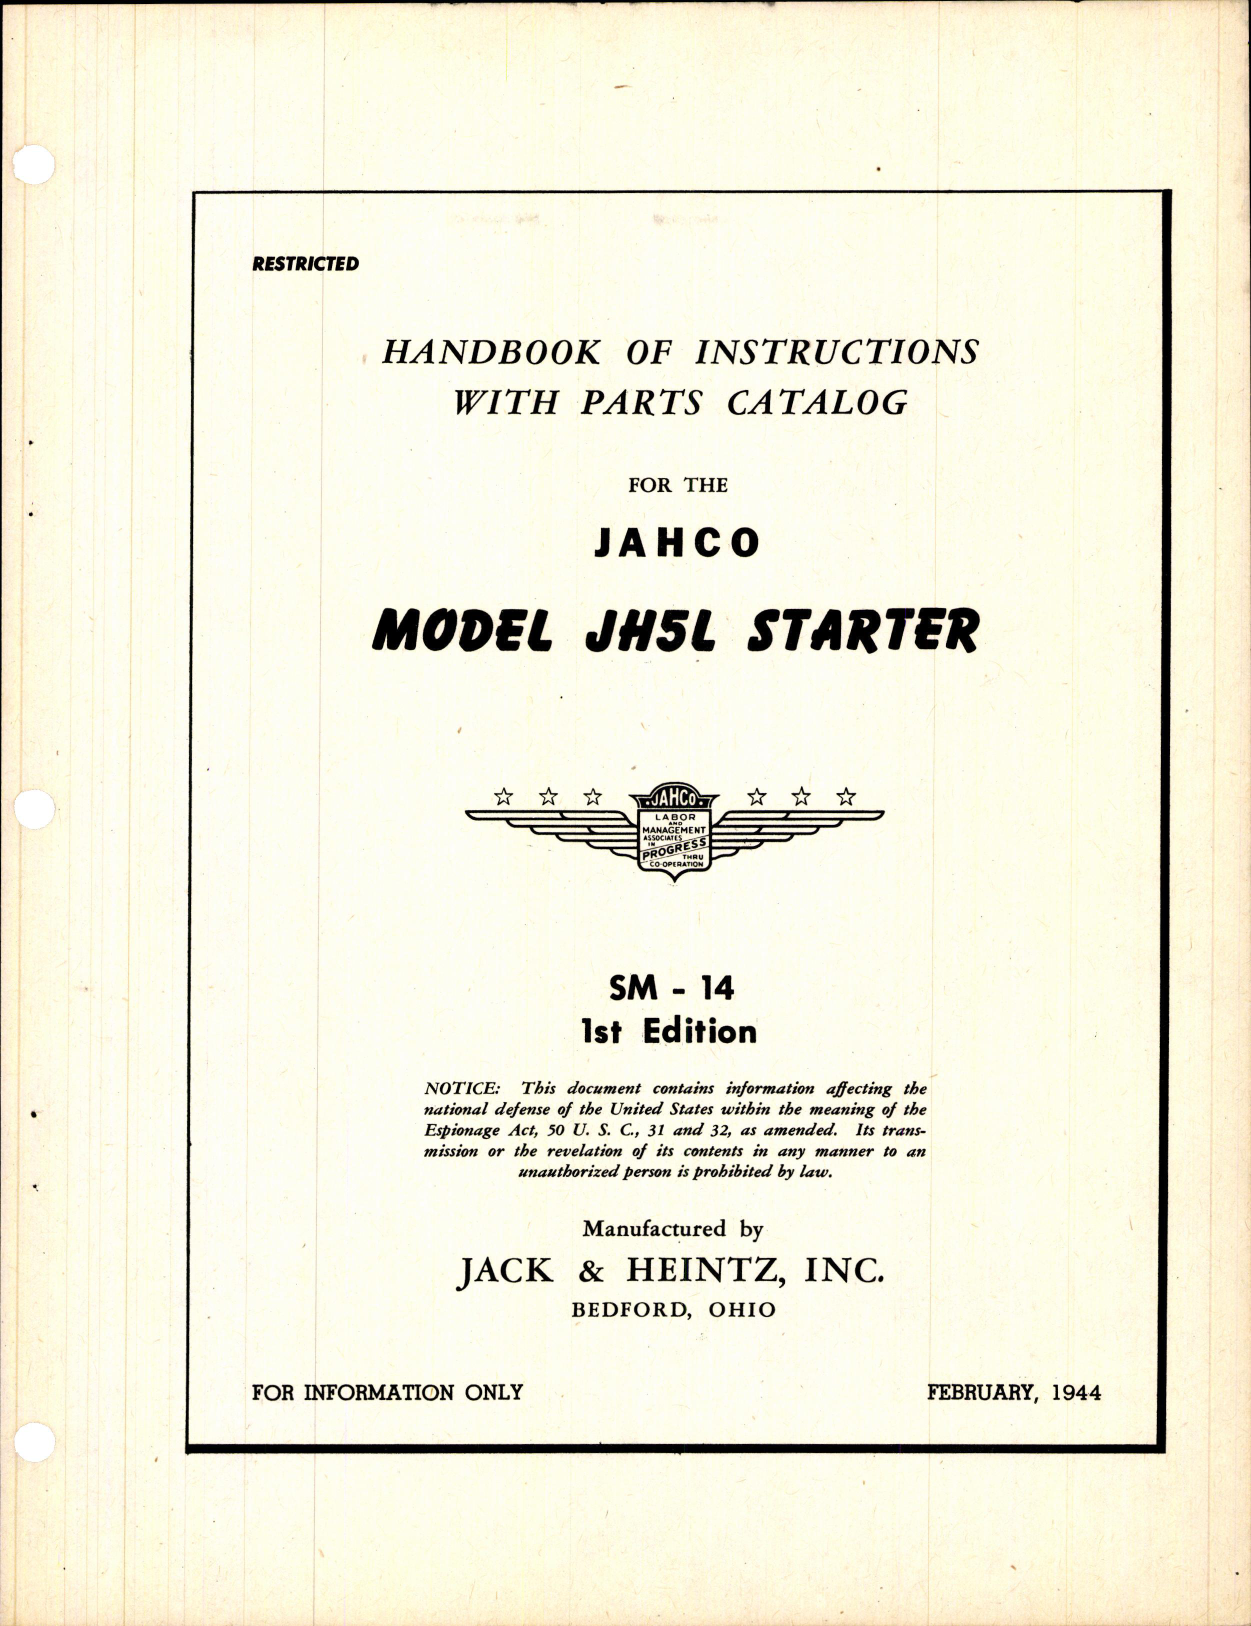 Sample page 3 from AirCorps Library document: Handbook of Instructions with Parts Catalog for Jahco Electric Starters Model JH5L